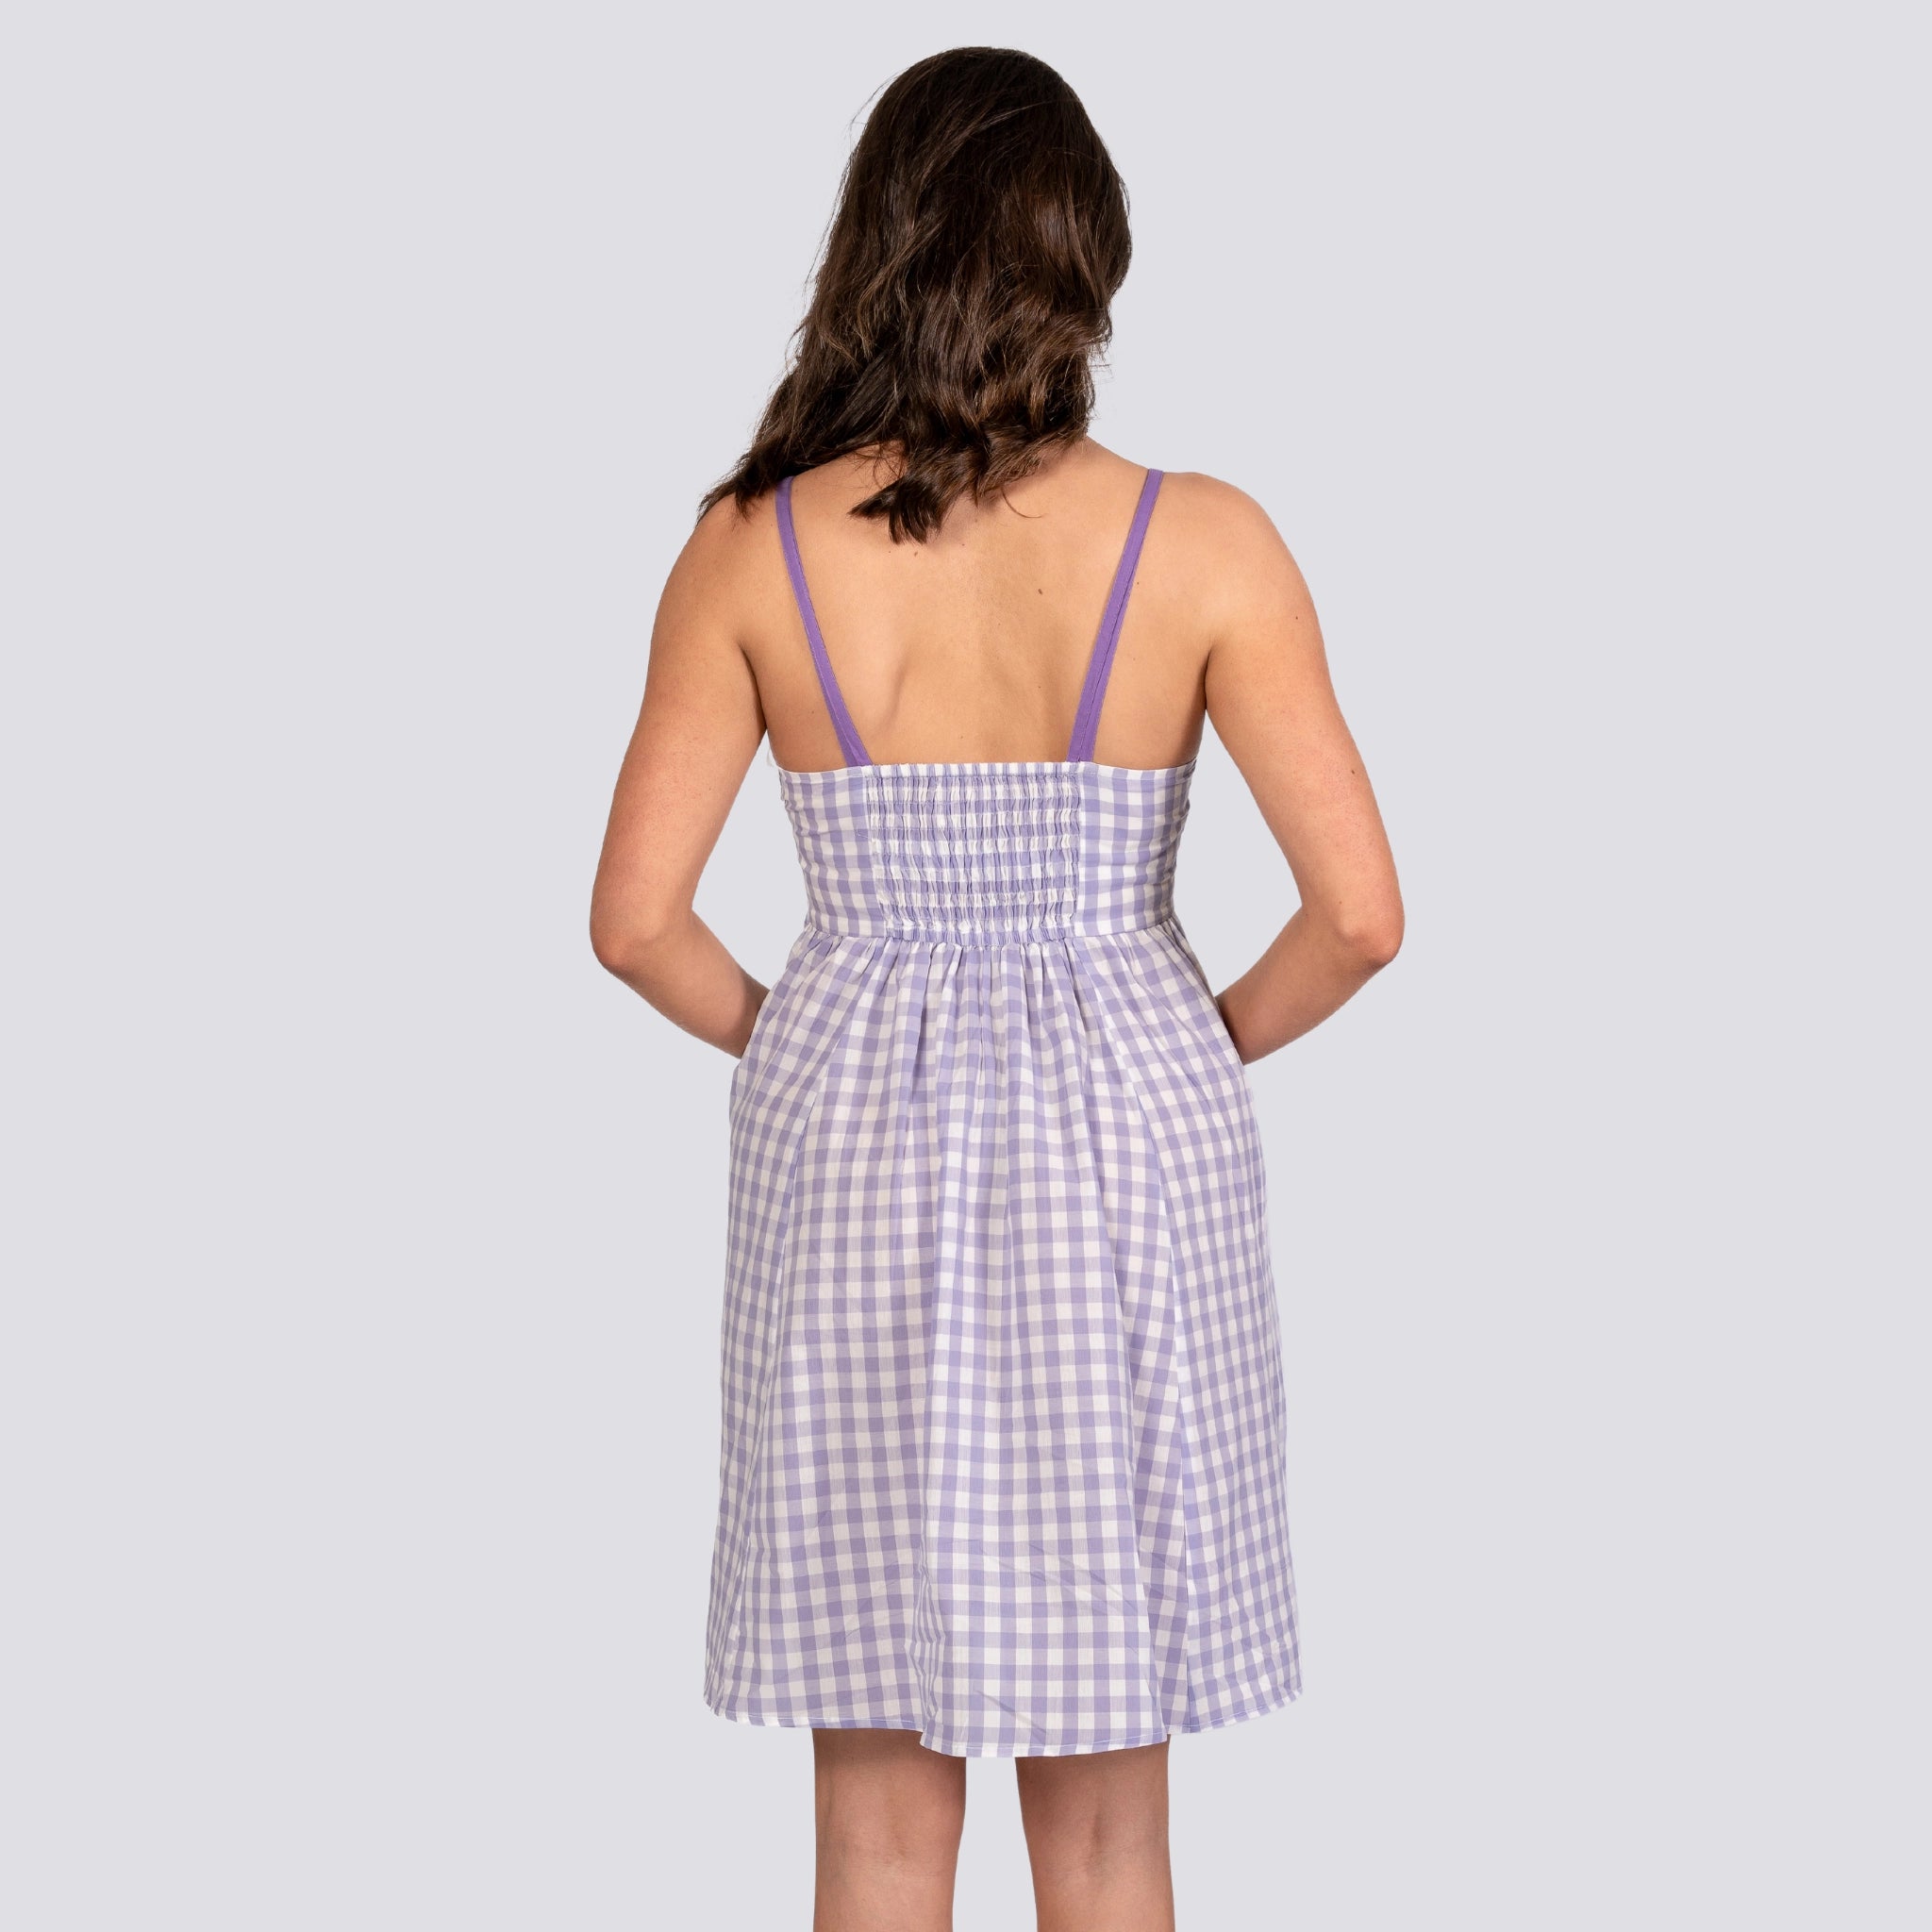 A woman seen from behind, wearing a Karee Lavender Plaid Cotton Mini Dress For Women with thin straps, standing against a gray background.